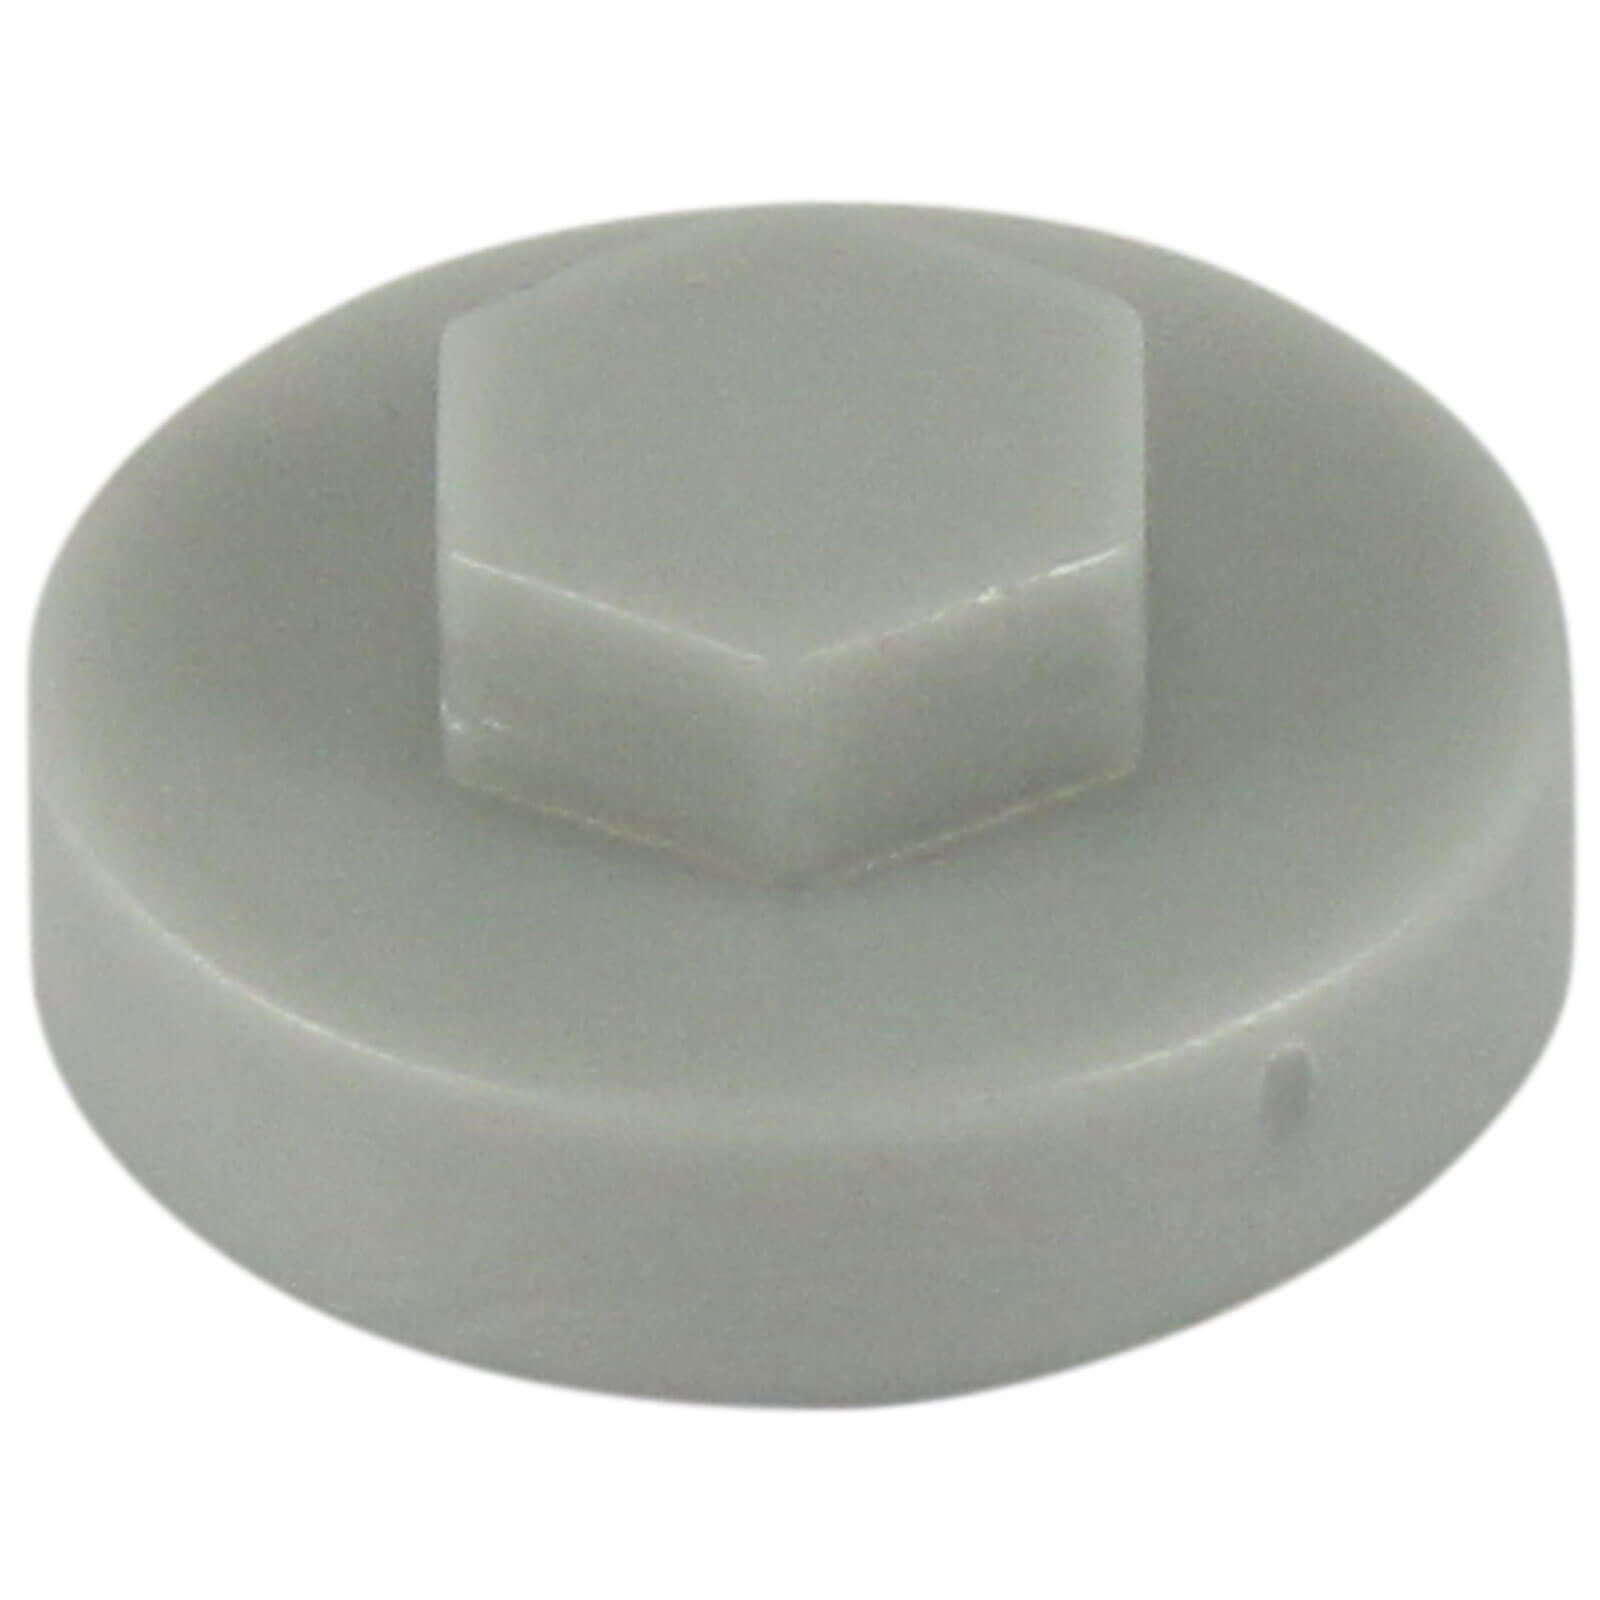 Image of Colour Match Hexagon Screw Cover Cap 5/16" x 19mm Merlin Grey Pack of 1000